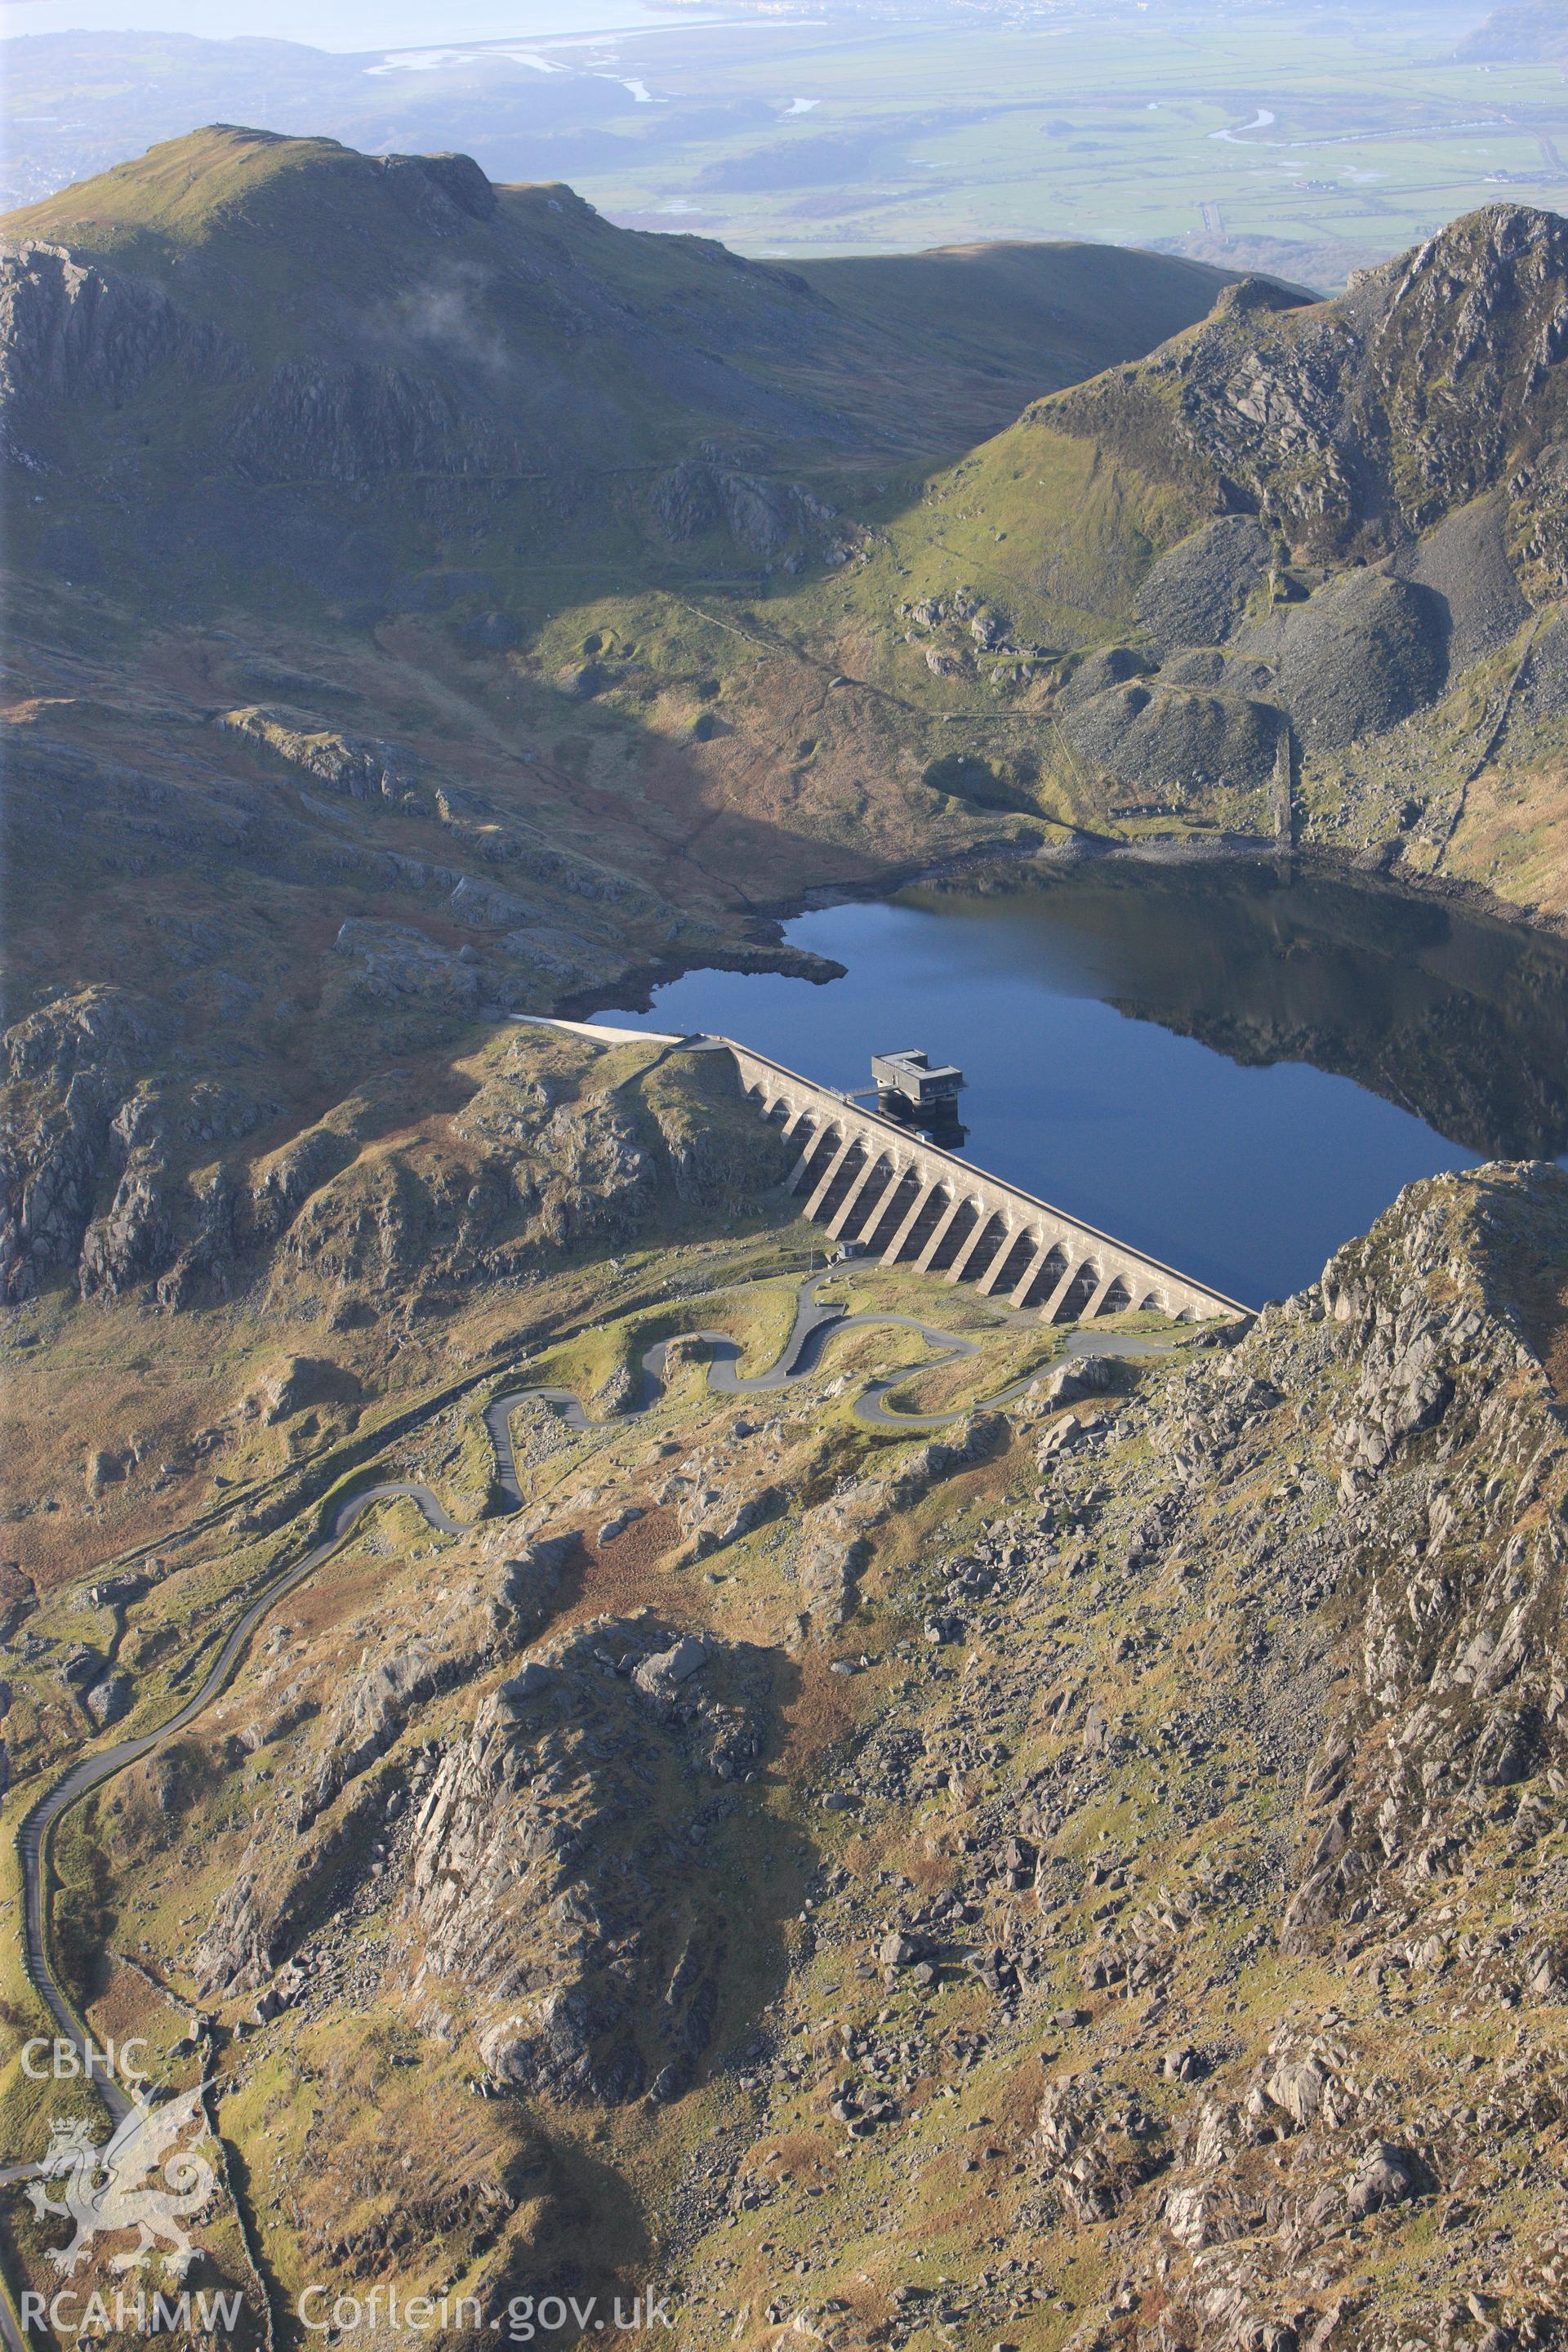 RCAHMW colour oblique photograph of Llyn Stwlan reservoir, with Moelwyn slate quarry. Taken by Toby Driver on 13/01/2012.